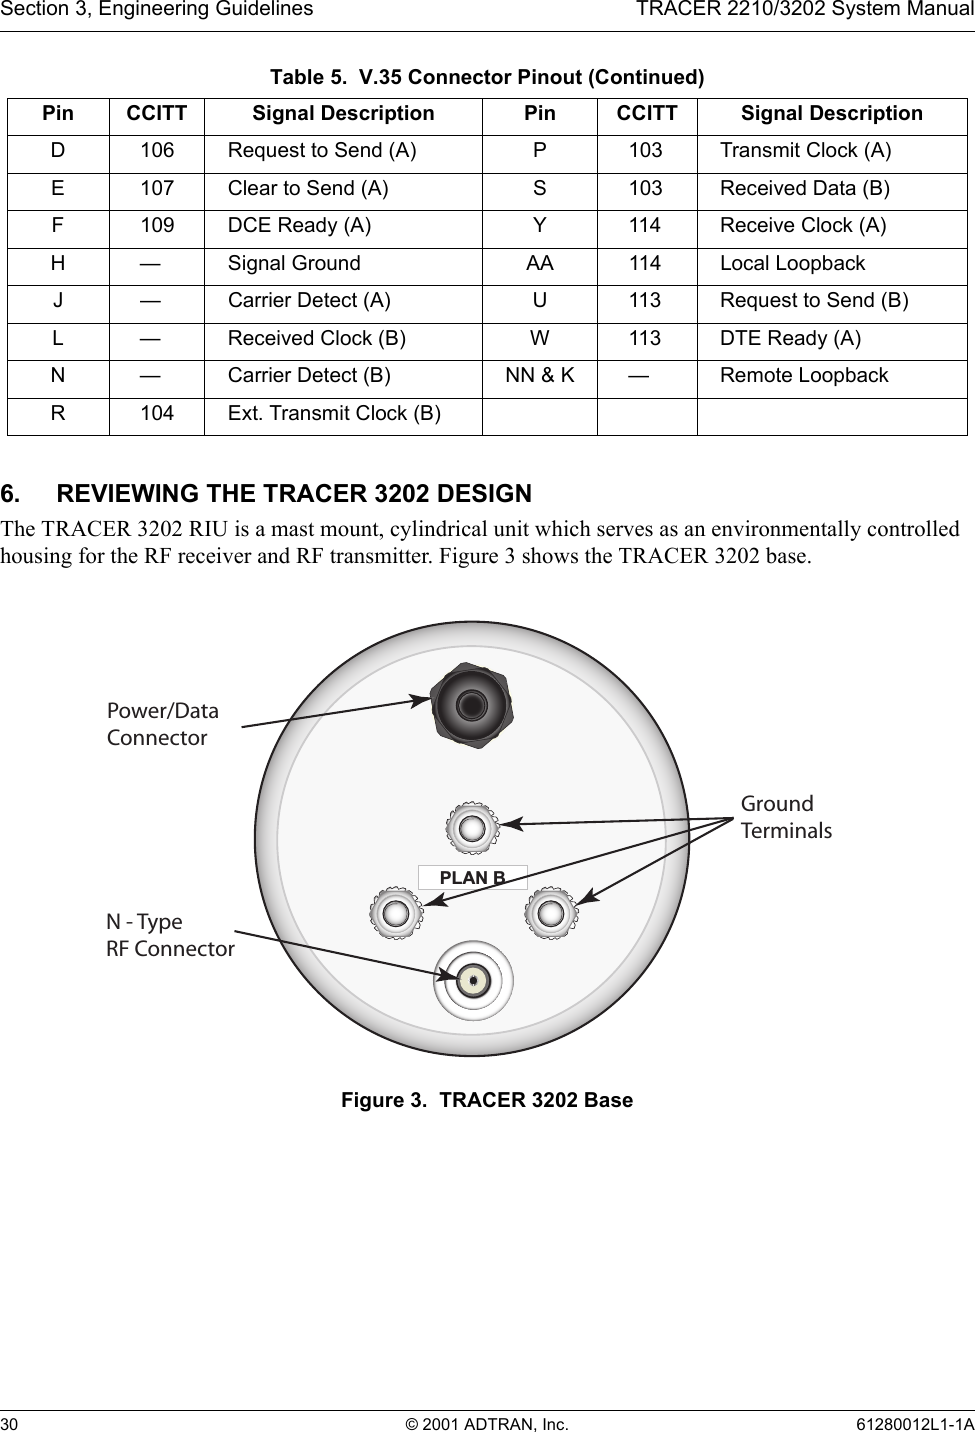 Section 3, Engineering Guidelines TRACER 2210/3202 System Manual30 © 2001 ADTRAN, Inc. 61280012L1-1A6. REVIEWING THE TRACER 3202 DESIGNThe TRACER 3202 RIU is a mast mount, cylindrical unit which serves as an environmentally controlled housing for the RF receiver and RF transmitter. Figure 3 shows the TRACER 3202 base.Figure 3.  TRACER 3202 BaseD 106 Request to Send (A) P 103 Transmit Clock (A)E 107 Clear to Send (A) S 103 Received Data (B)F 109 DCE Ready (A) Y 114 Receive Clock (A)H — Signal Ground AA 114 Local LoopbackJ — Carrier Detect (A) U 113 Request to Send (B)L — Received Clock (B) W 113 DTE Ready (A)N — Carrier Detect (B) NN &amp; K — Remote LoopbackR 104 Ext. Transmit Clock (B)Table 5.  V.35 Connector Pinout (Continued)Pin CCITT Signal Description Pin CCITT Signal DescriptionPLAN BPower/DataConnectorGroundTerminalsN - TypeRF Connector